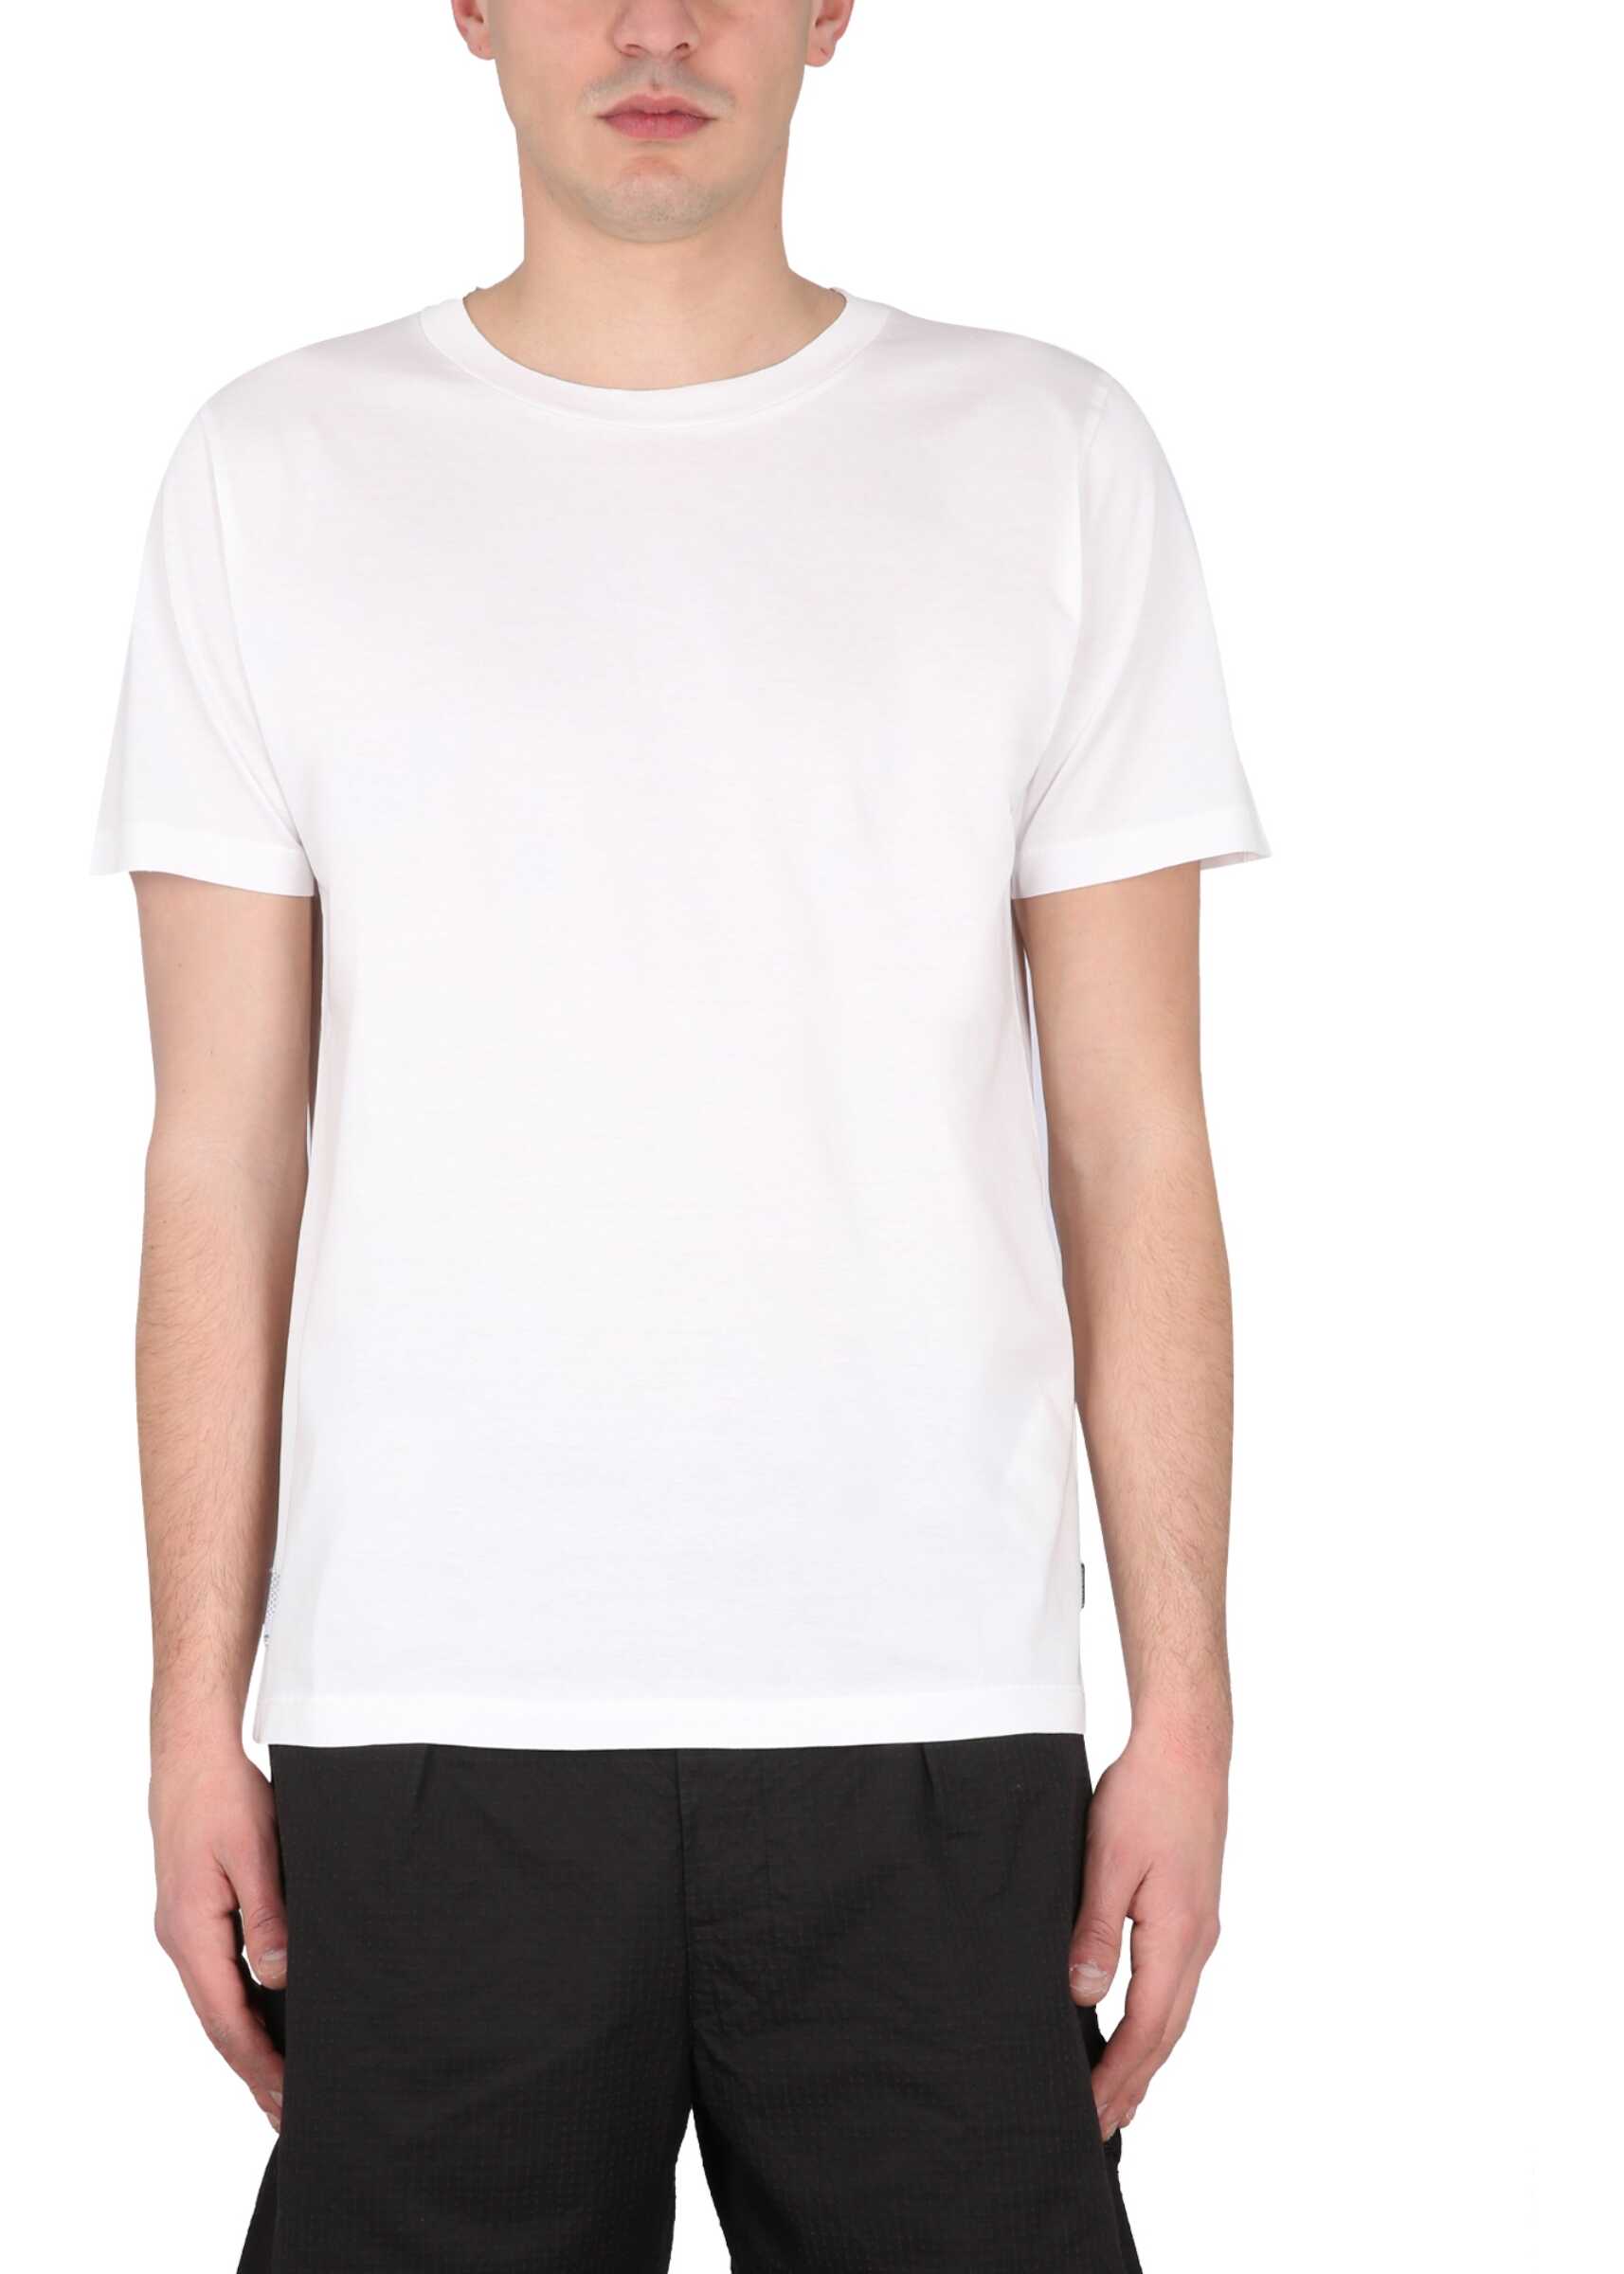 STONE ISLAND SHADOW PROJECT Jersey T-Shirt WHITE